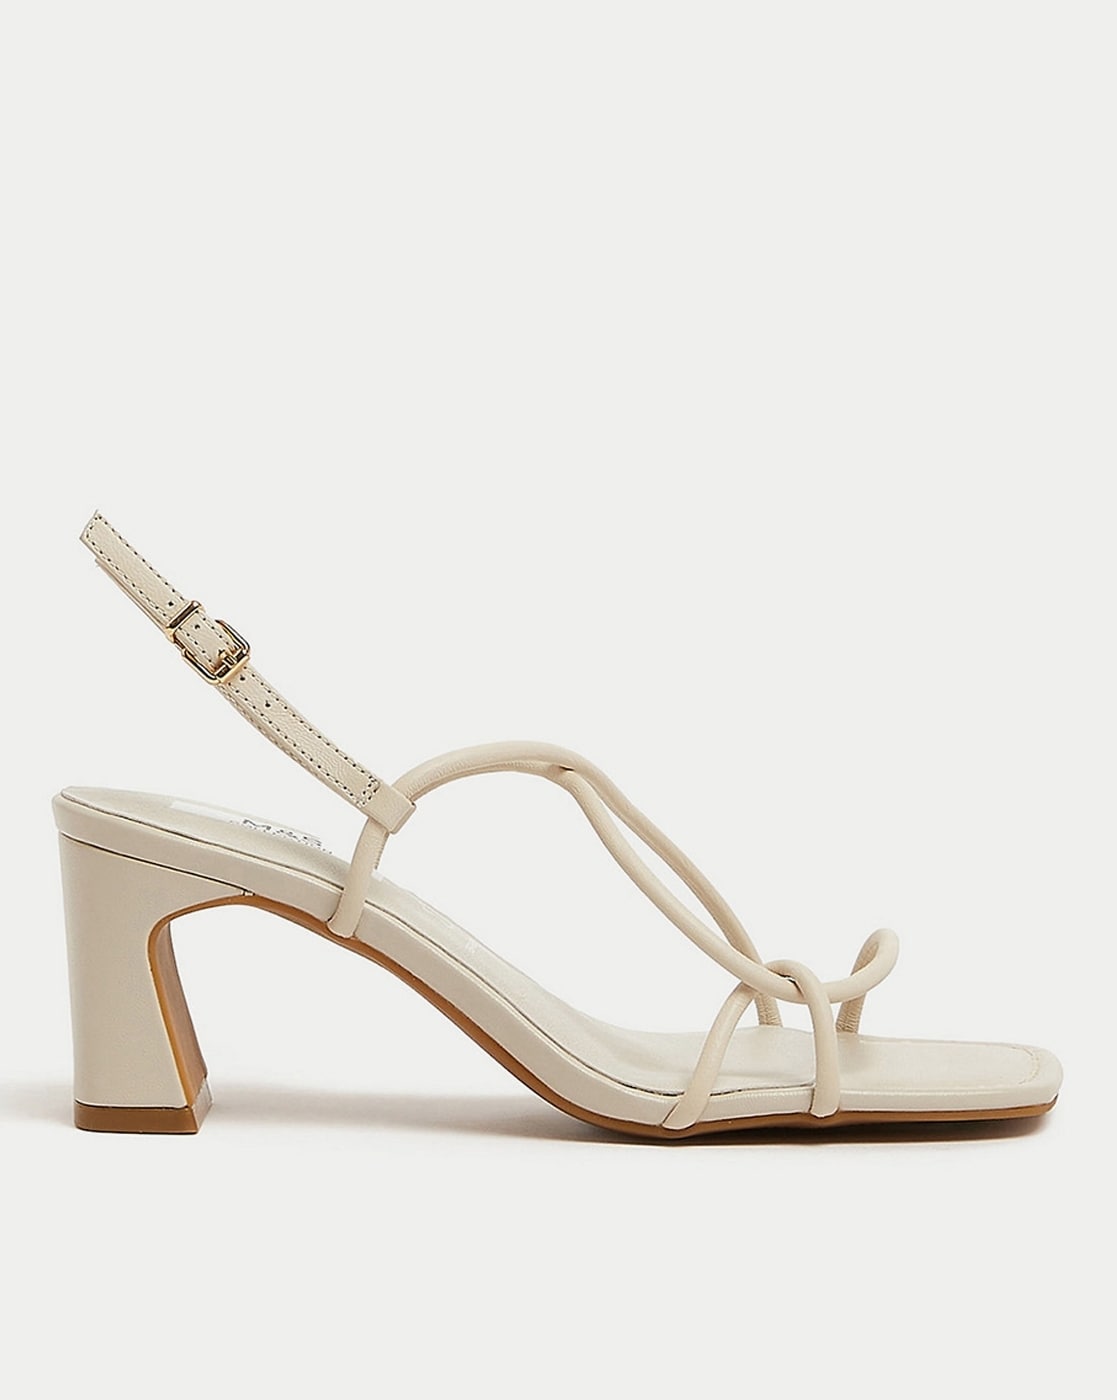 Guess Shoes | Gabeli Ivory Heeled Sandals | Style Representative